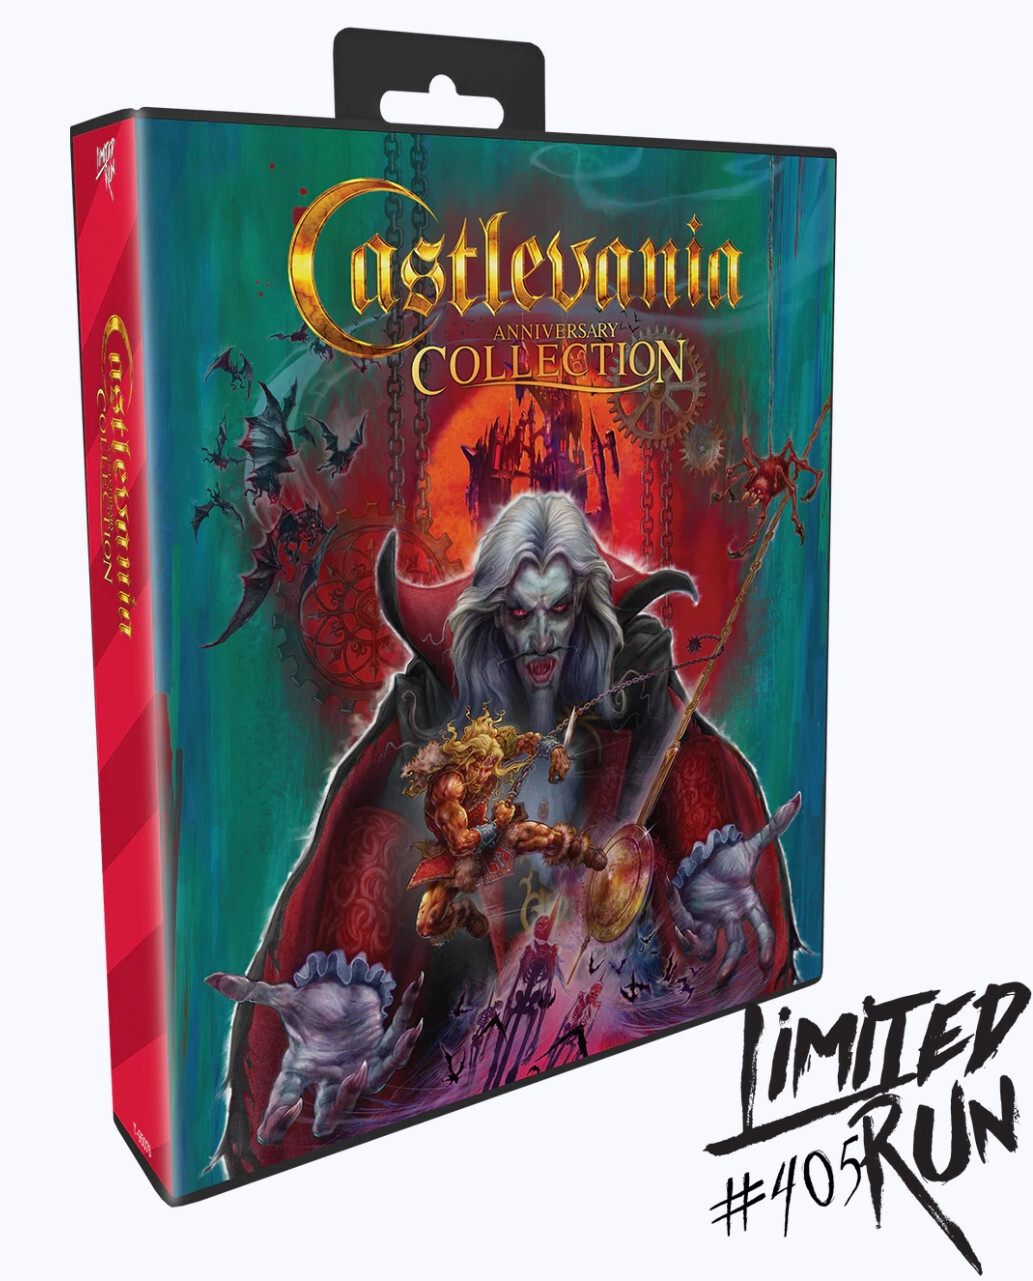 Limited Run Castlevania - Anniversary Collection Bloodlines Edition Games) PlayStation 4